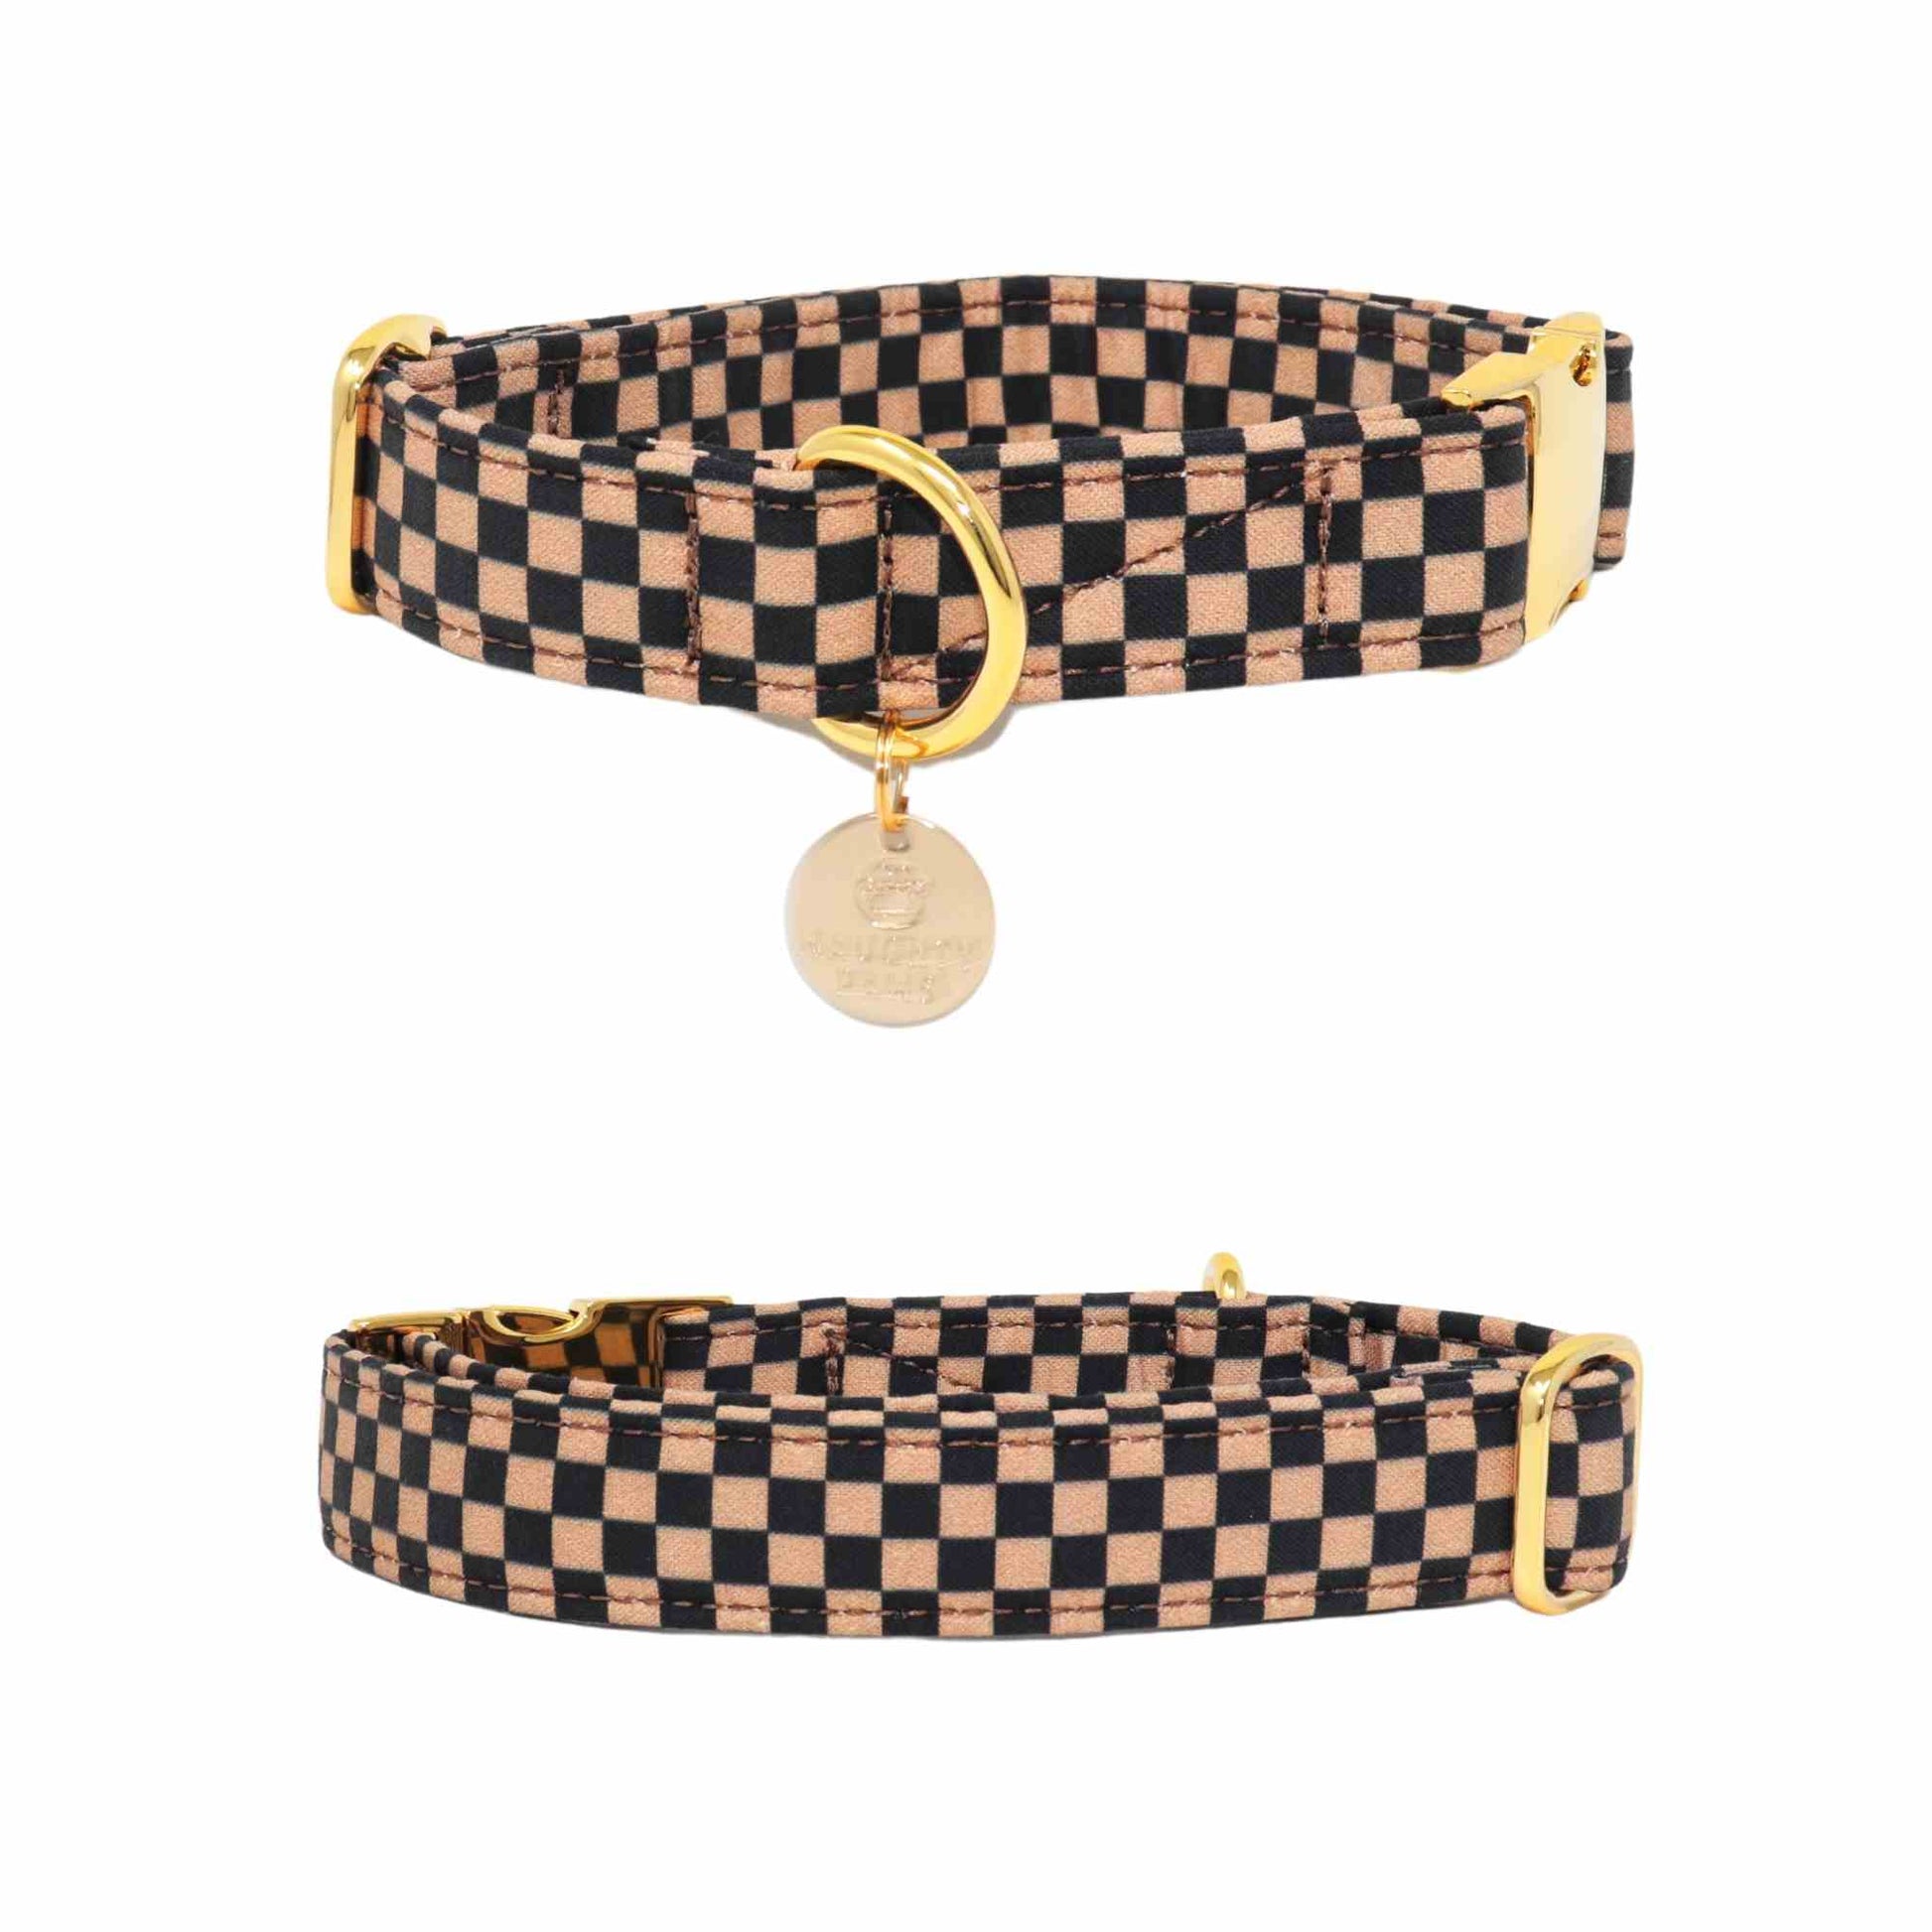 Cold Brew" Handmade Brown and Black Boho Checker Dog Collar - Stylish and Durable Accessory for Your Pup